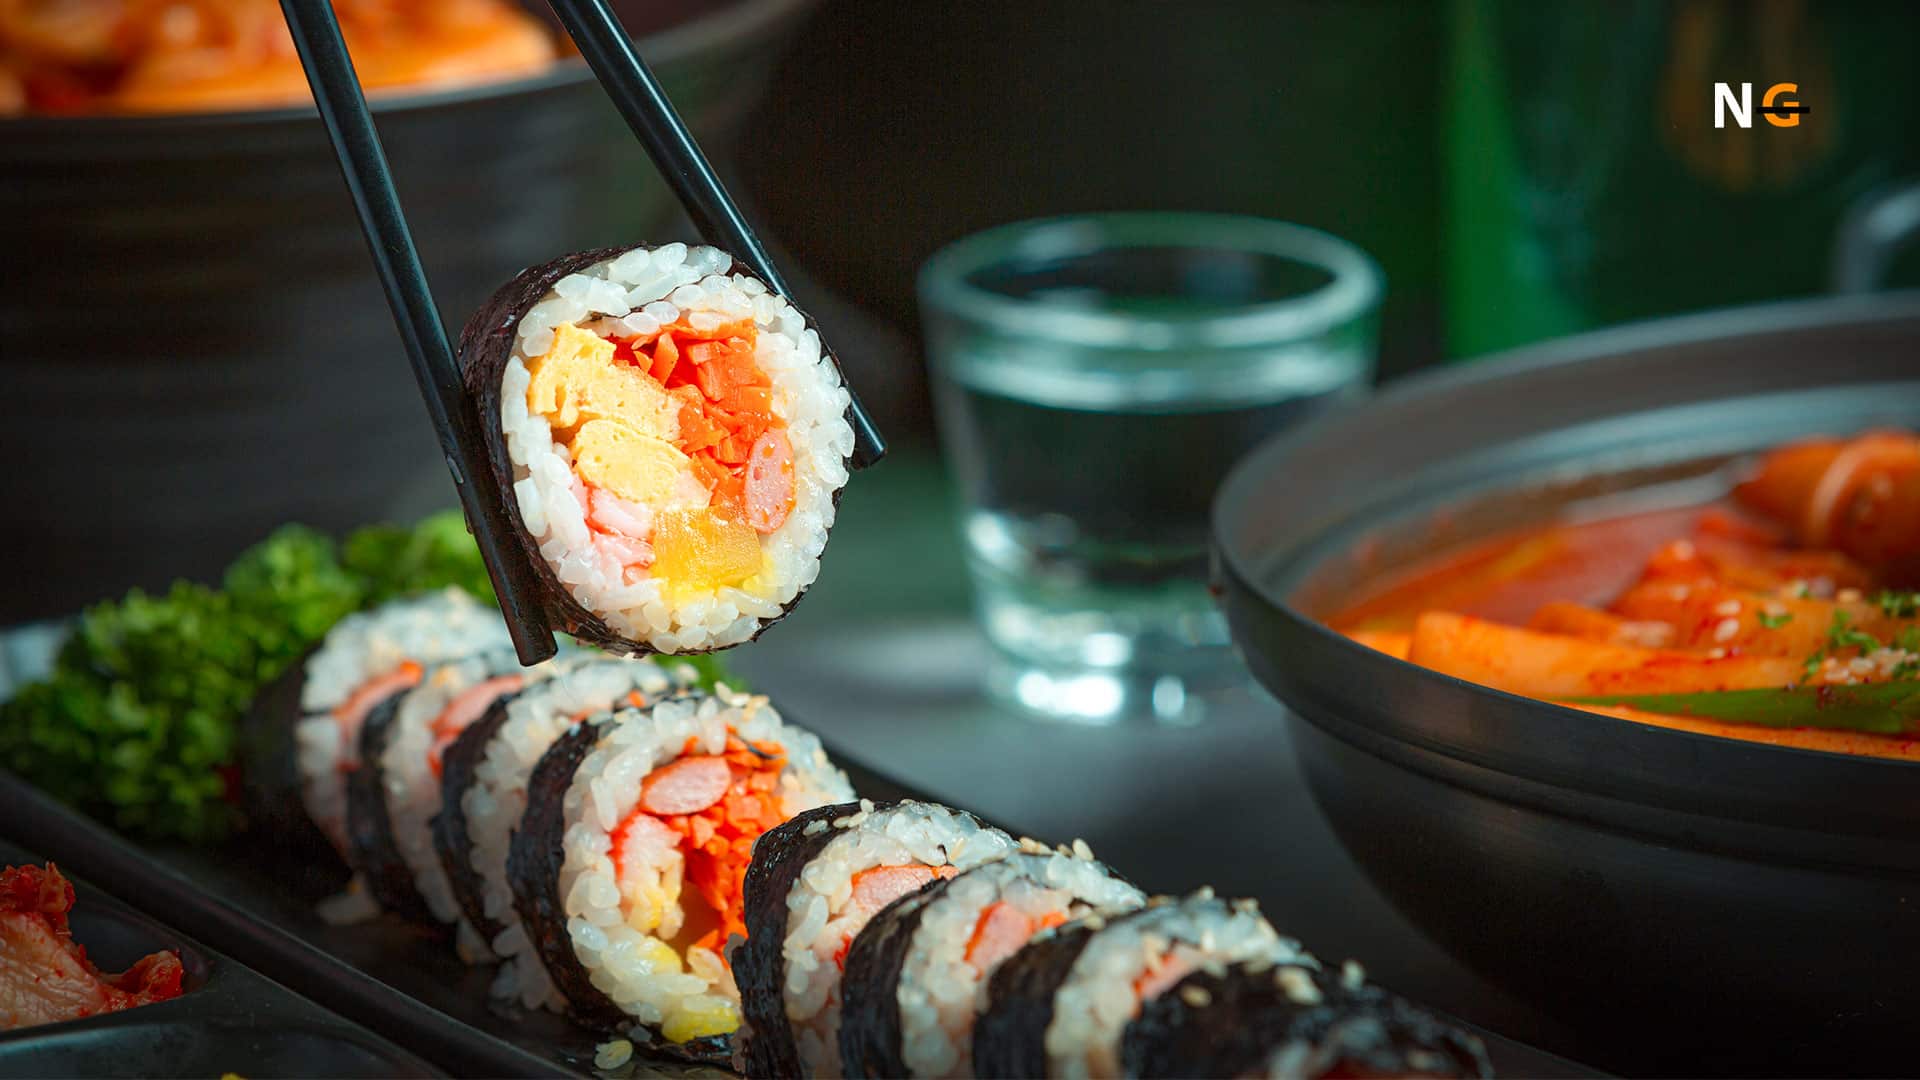 Types of Sushi that May Contain Gluten